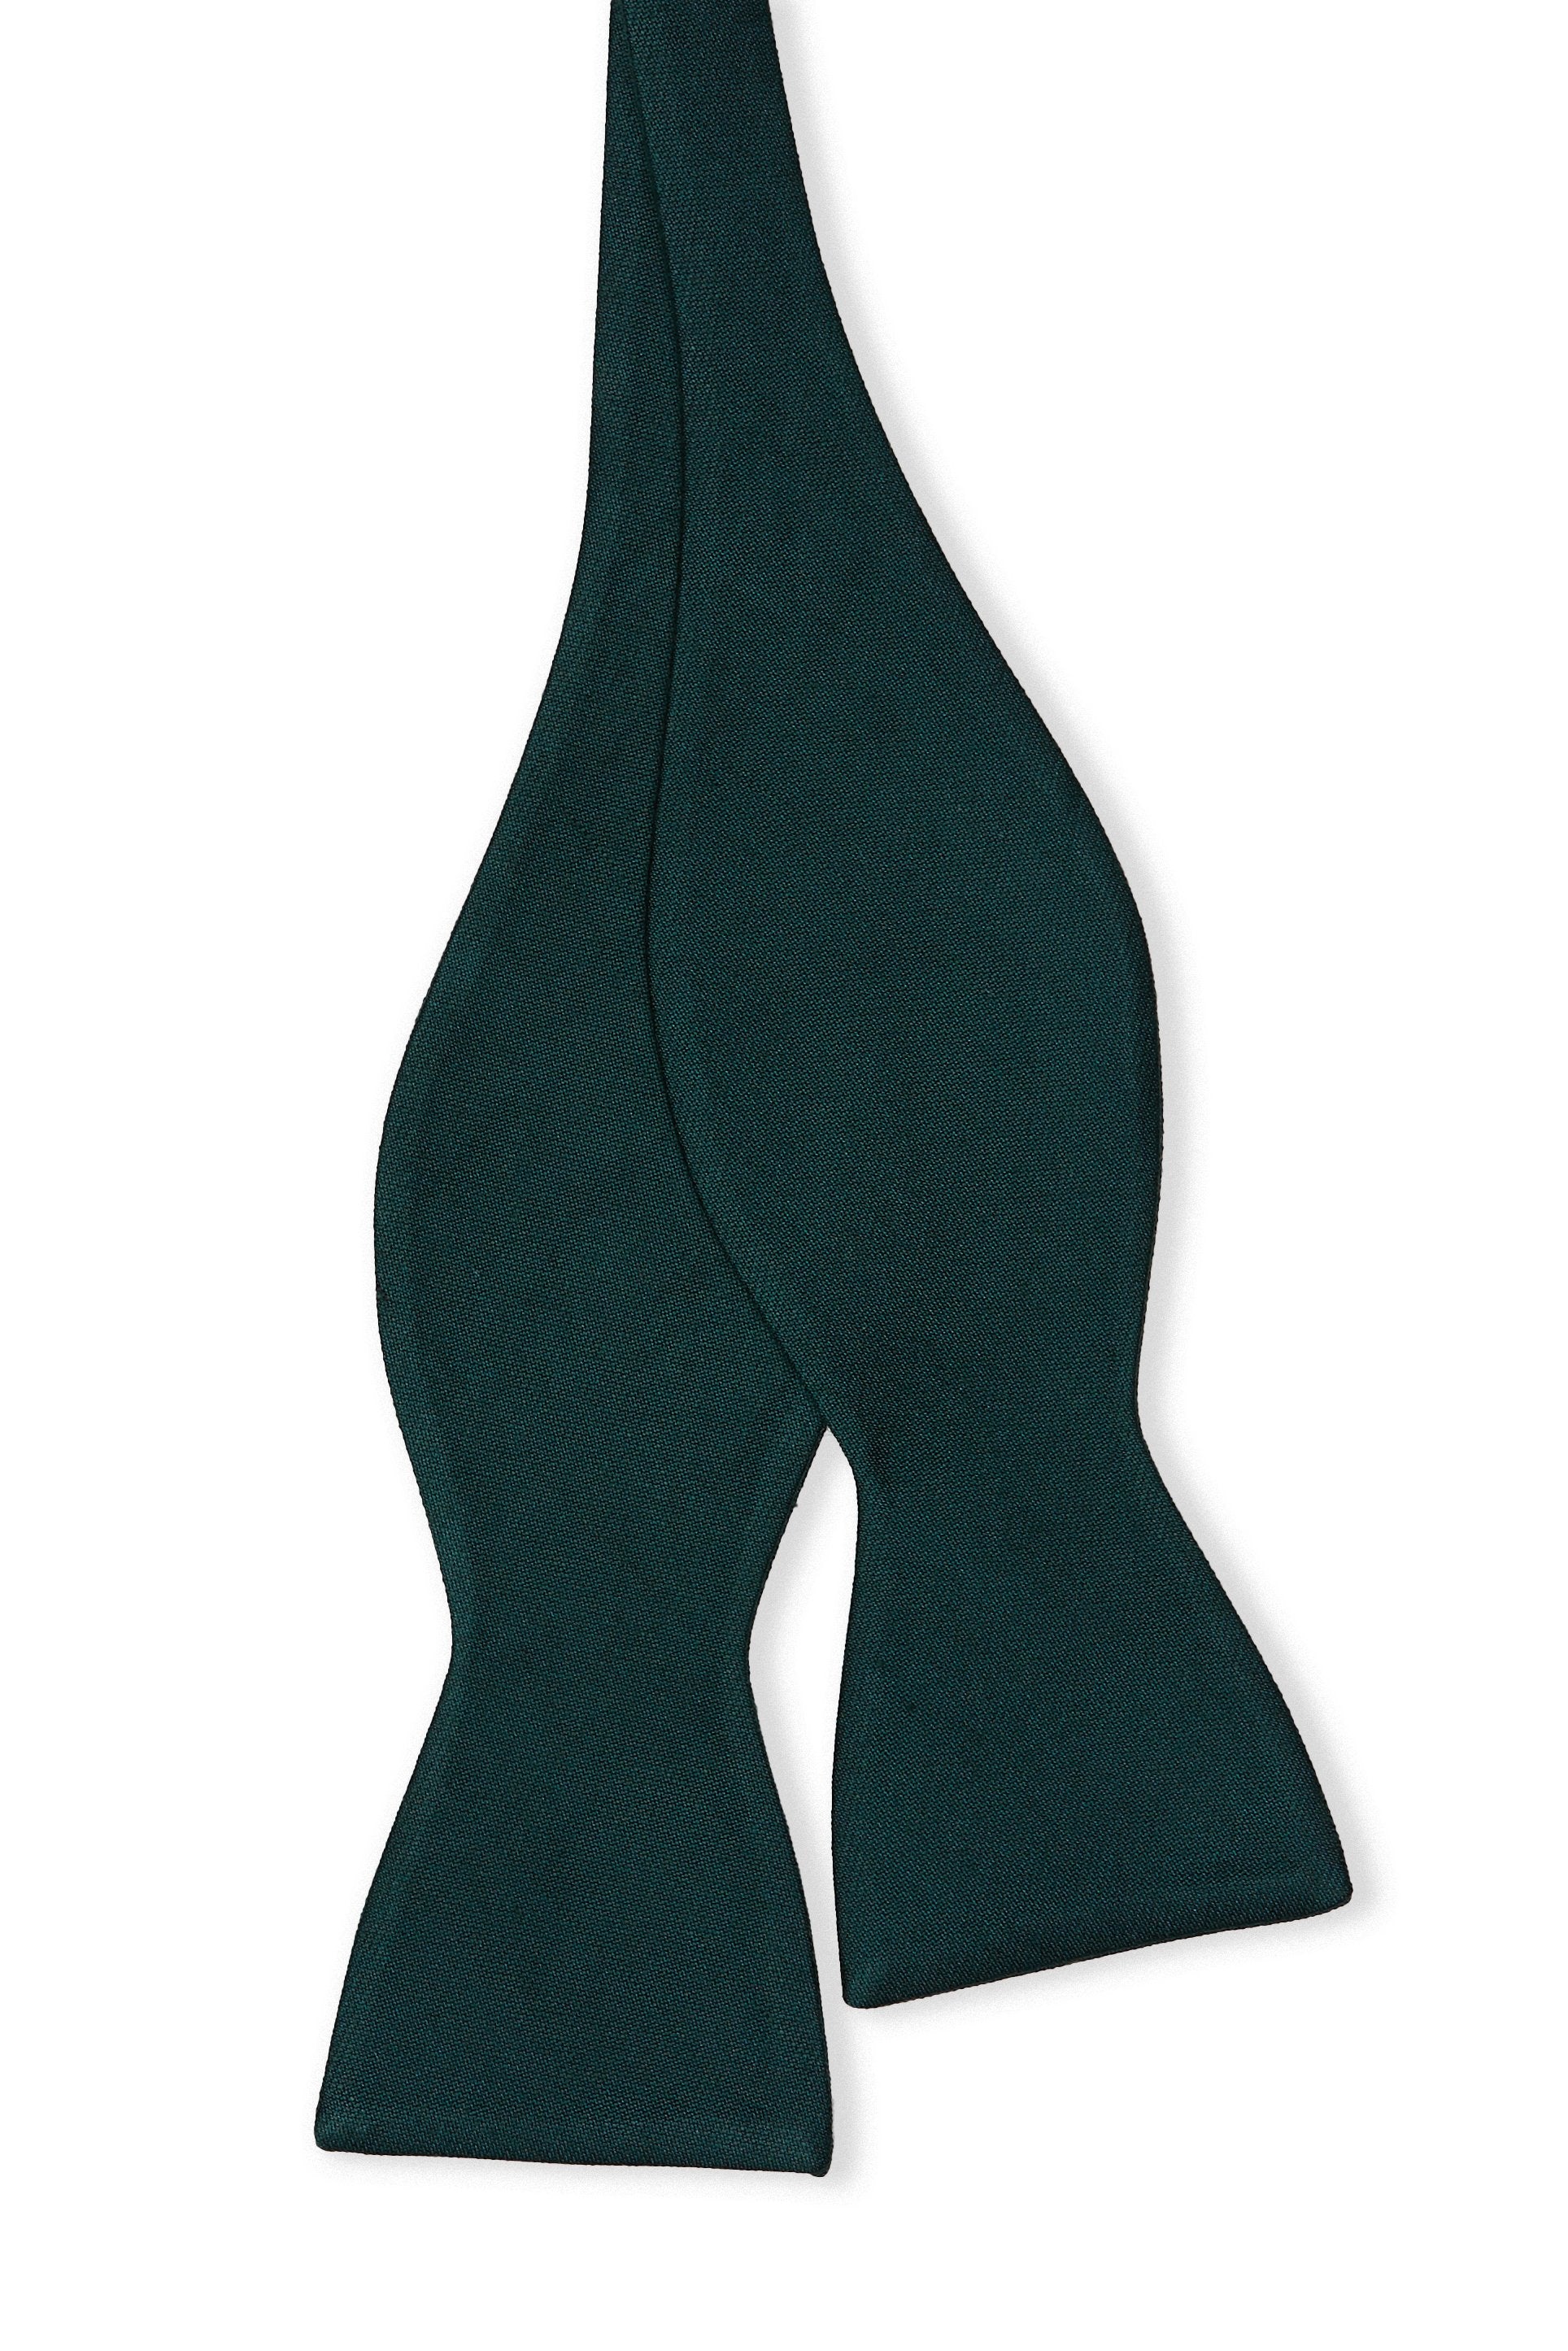 Daniel Bow Tie in emerald green by Birdy Grey, front view